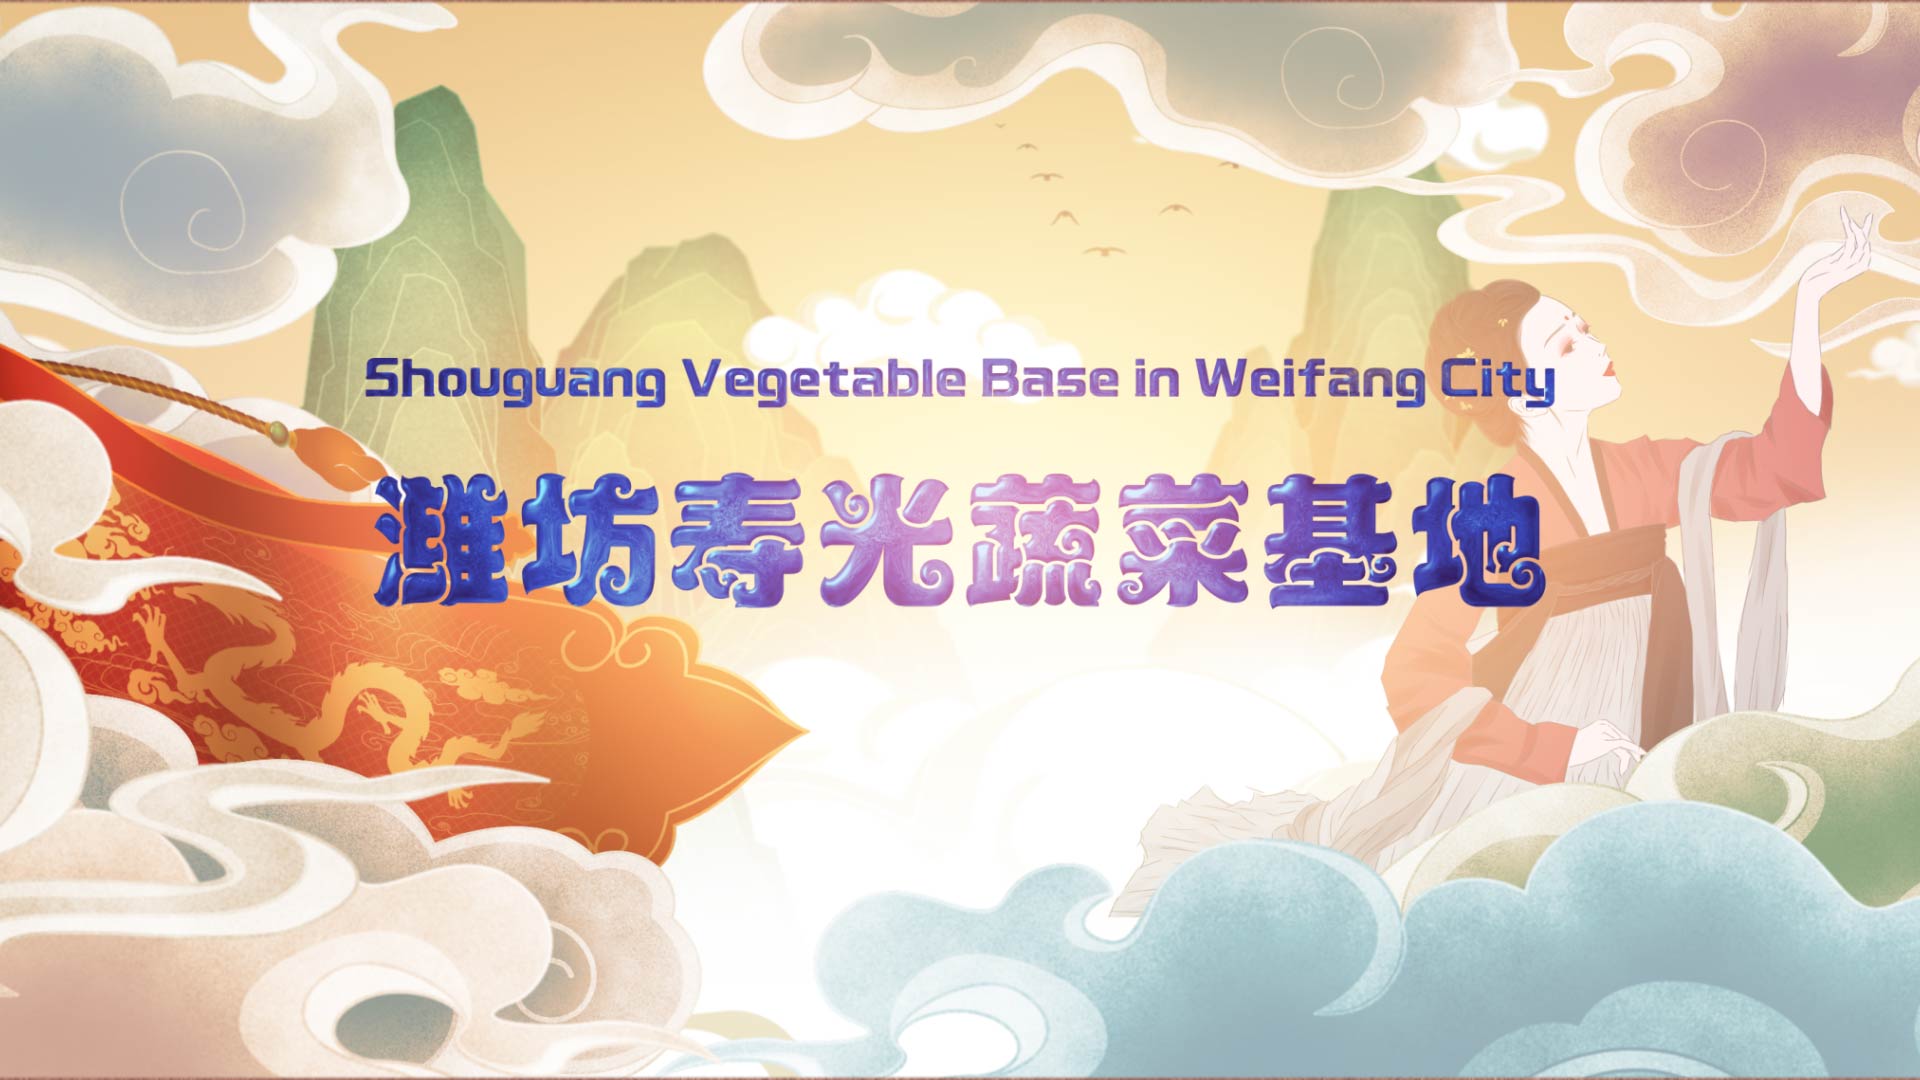 Shouguang Vegetable Base in Weifang City